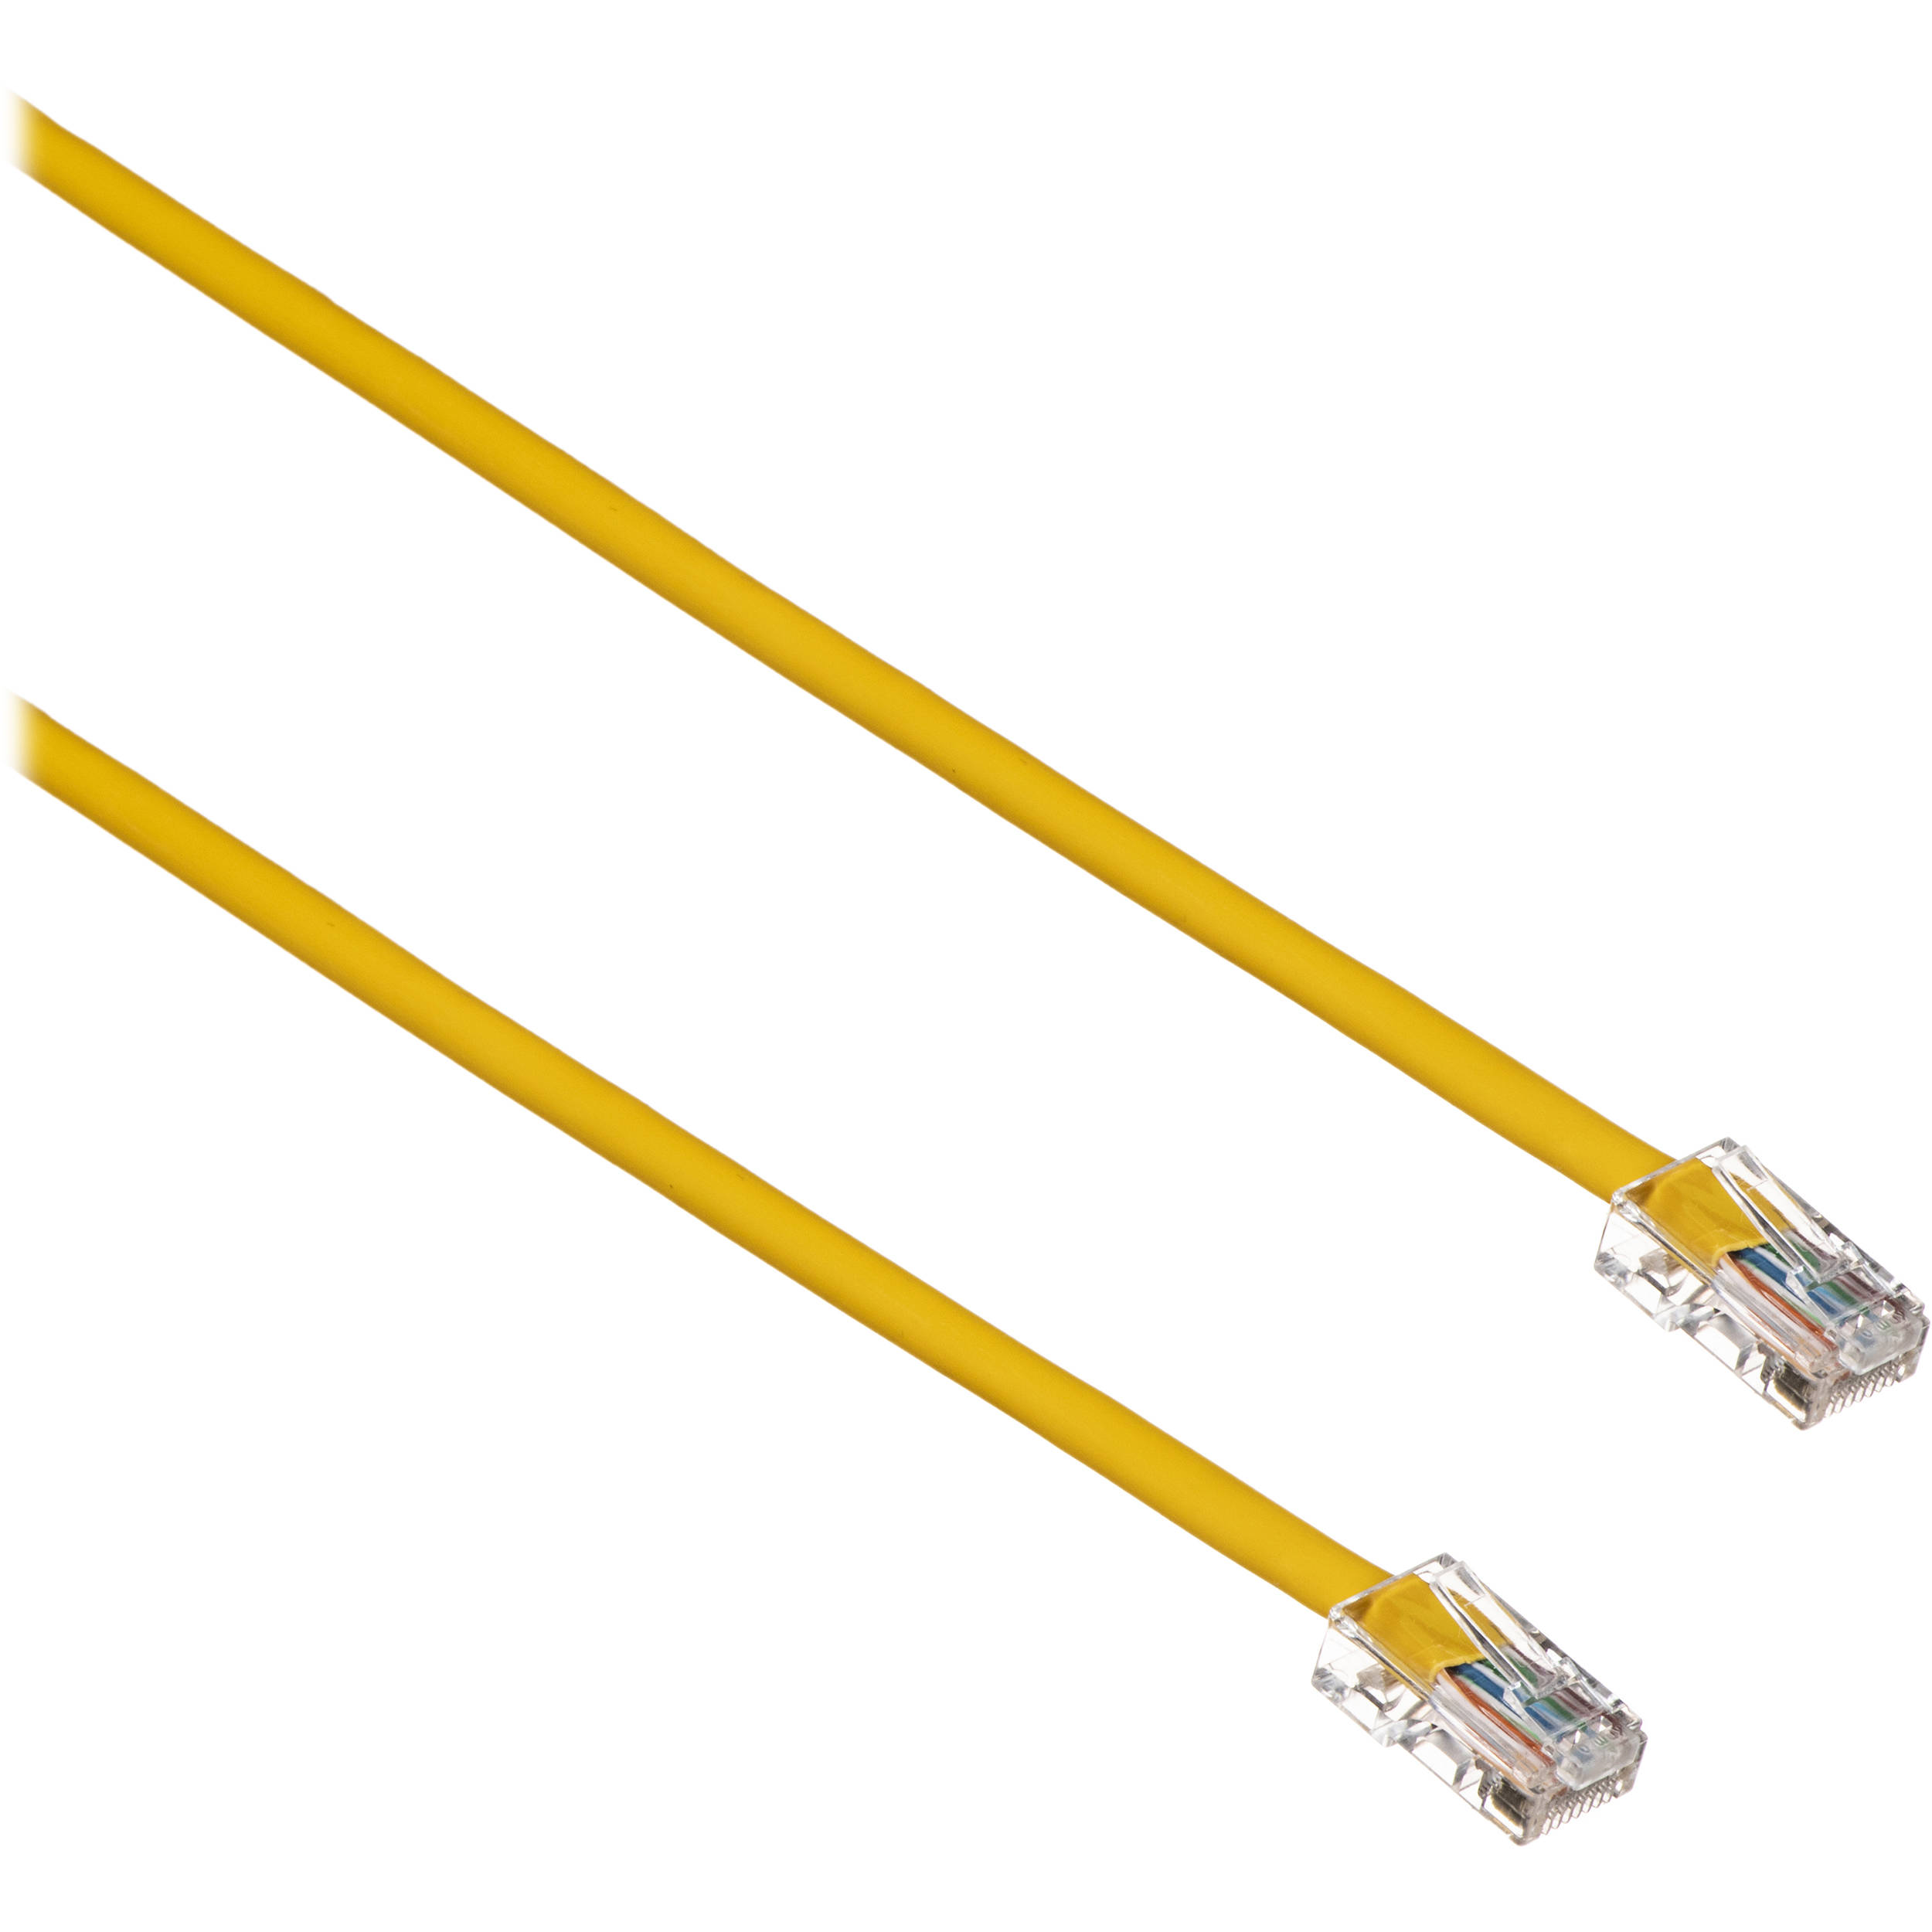 Comprehensive CAT5e 350 MHz Assembly Cable (15 feet, Yellow)